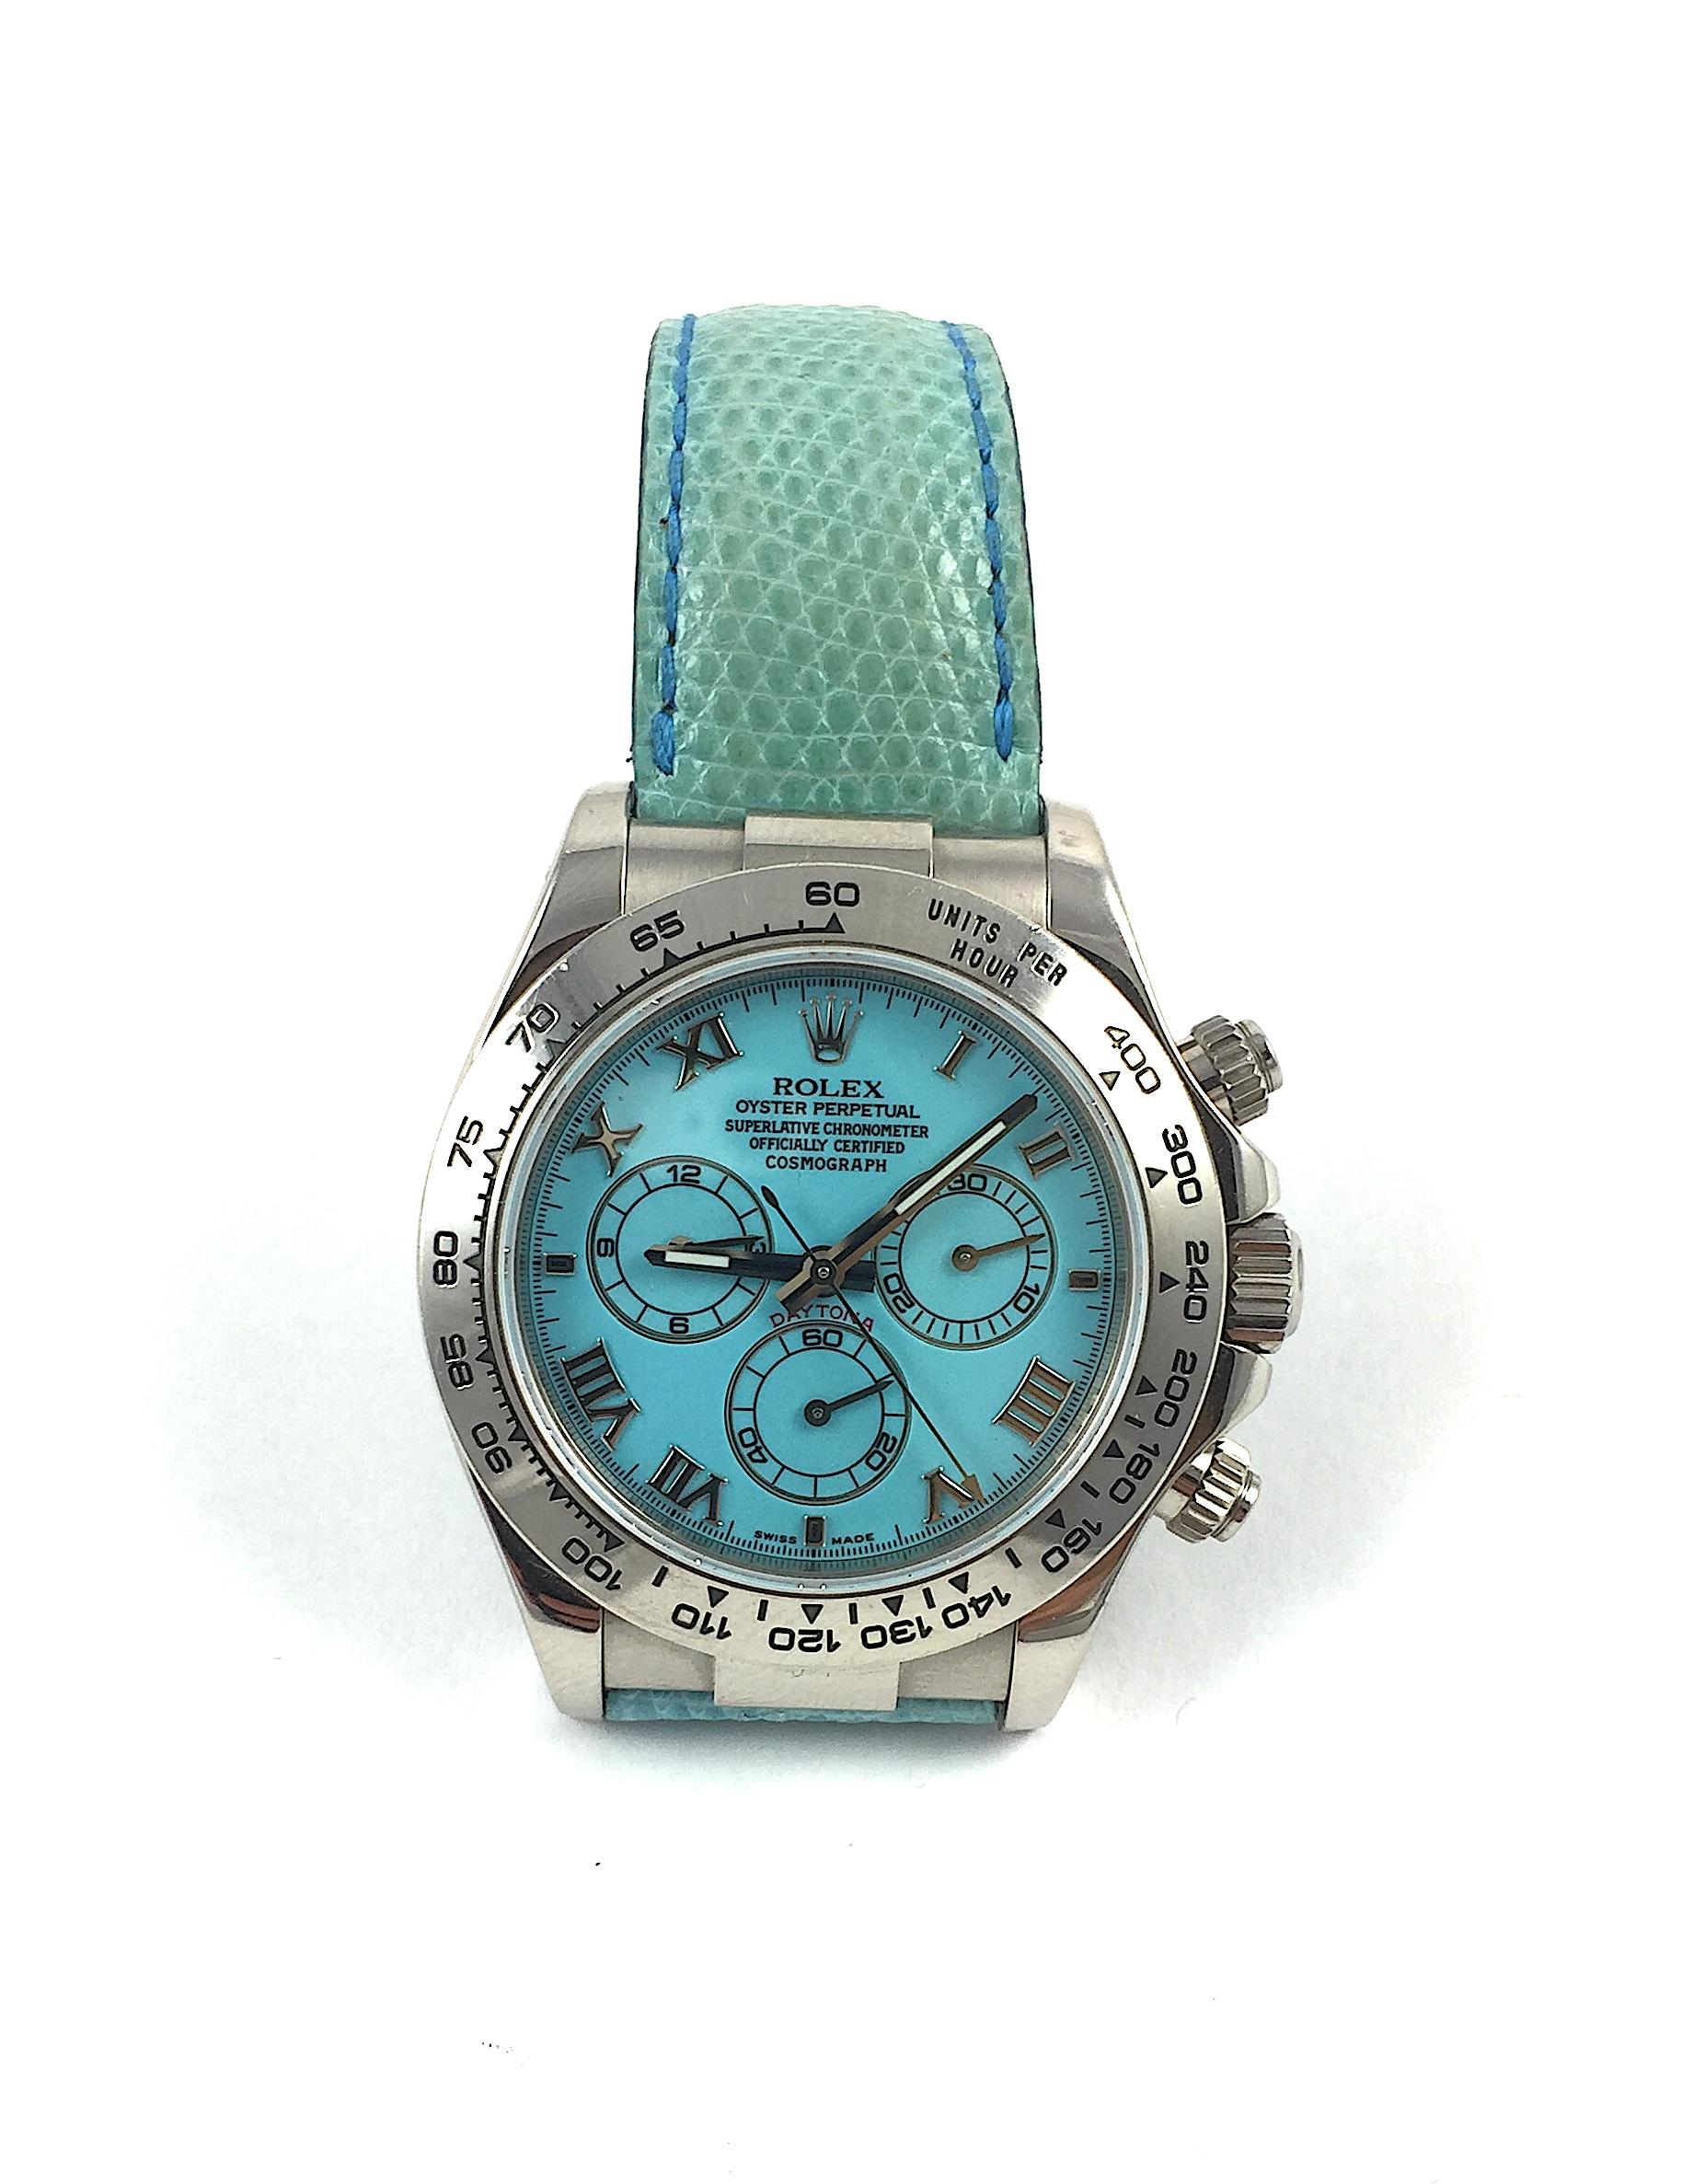 Rolex 18K White Gold Oyster Perpetual Cosmograph Daytona Wristwatch
Rare Factory Blue Turquoise Dial with Three Sub-Dials
18K White Gold Bezel Which Shows Wear and Some Use
40mm in size 
Rolex Calibre 4130 Automatic Chronograph Movement
Sapphire